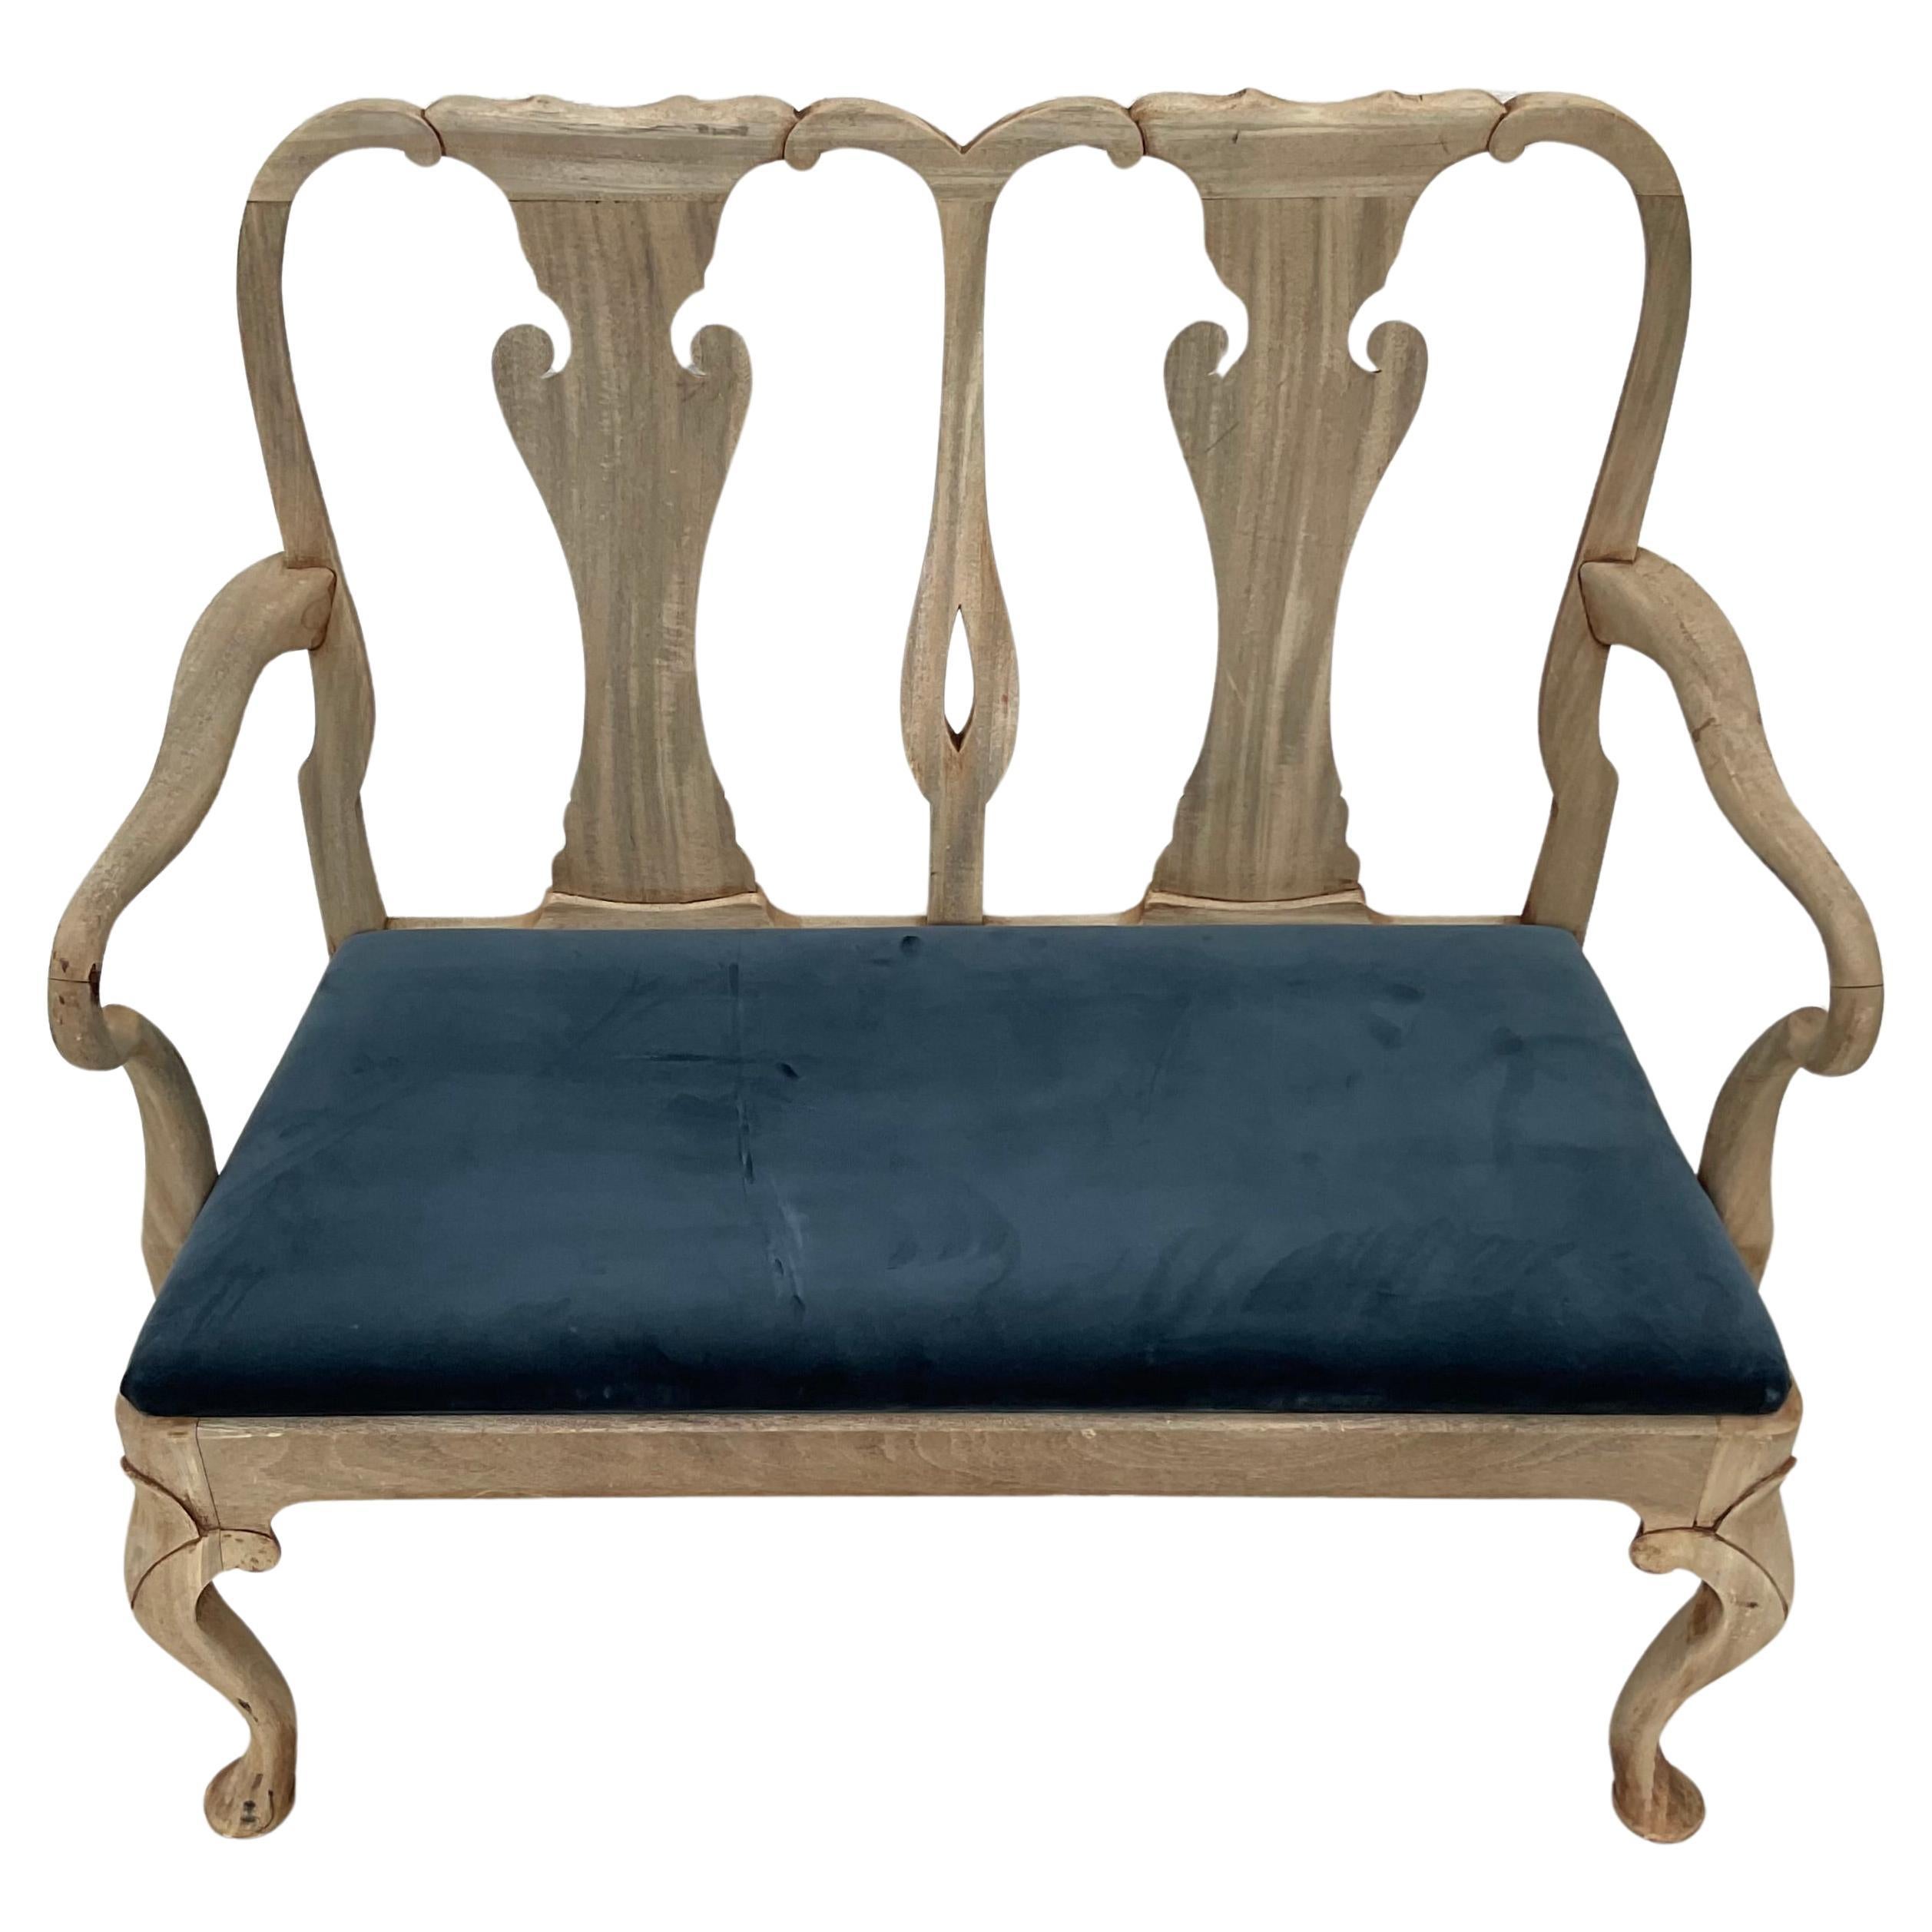 19th century Queen Anne settee. Features Wonderful bleached wood with lovely French blue seat cushion . Beautiful curved arms and cabriole legs with claw feet. Perfect bench for your entranceway, hallway or wherever extra seating is needed. 